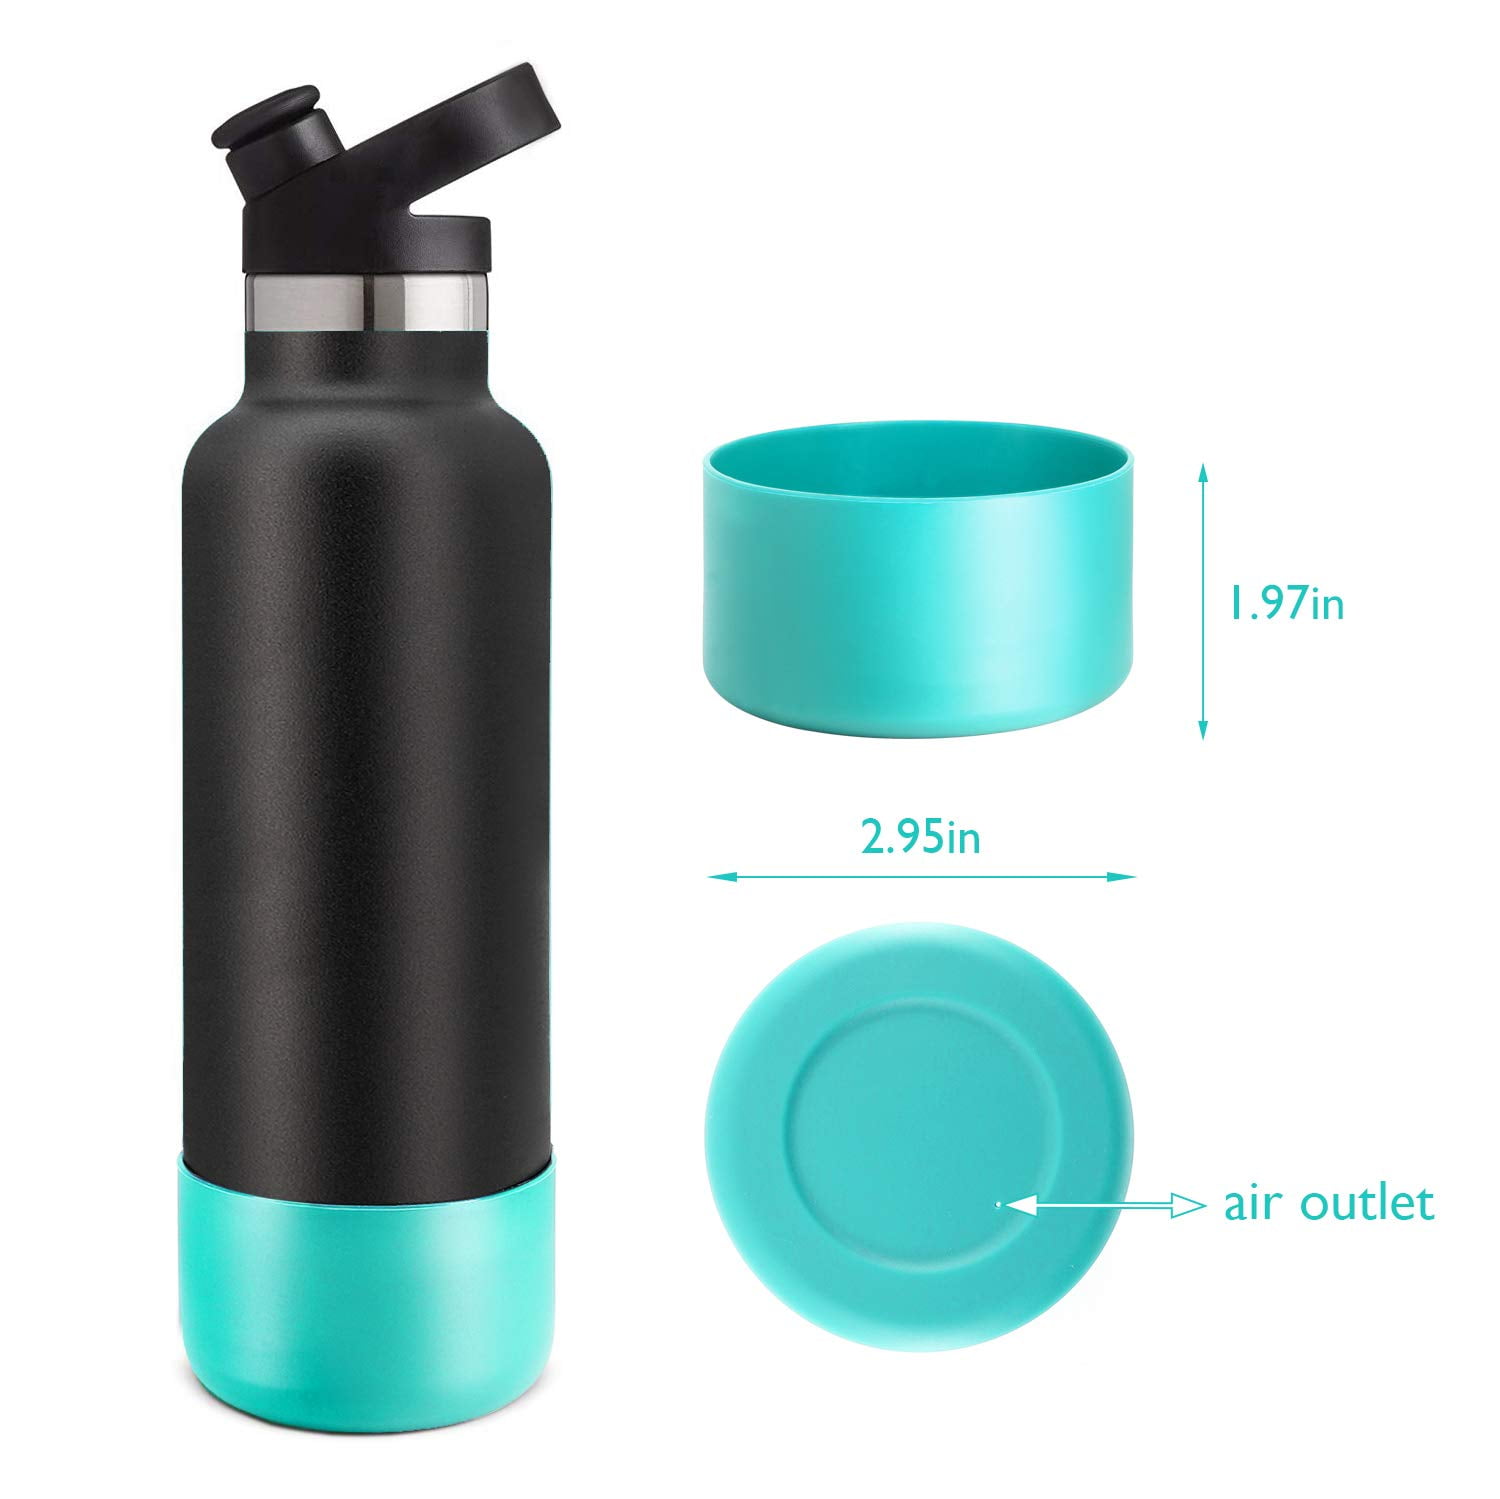 Waterbottle haul! Brand new hydro flask with silicone boot for